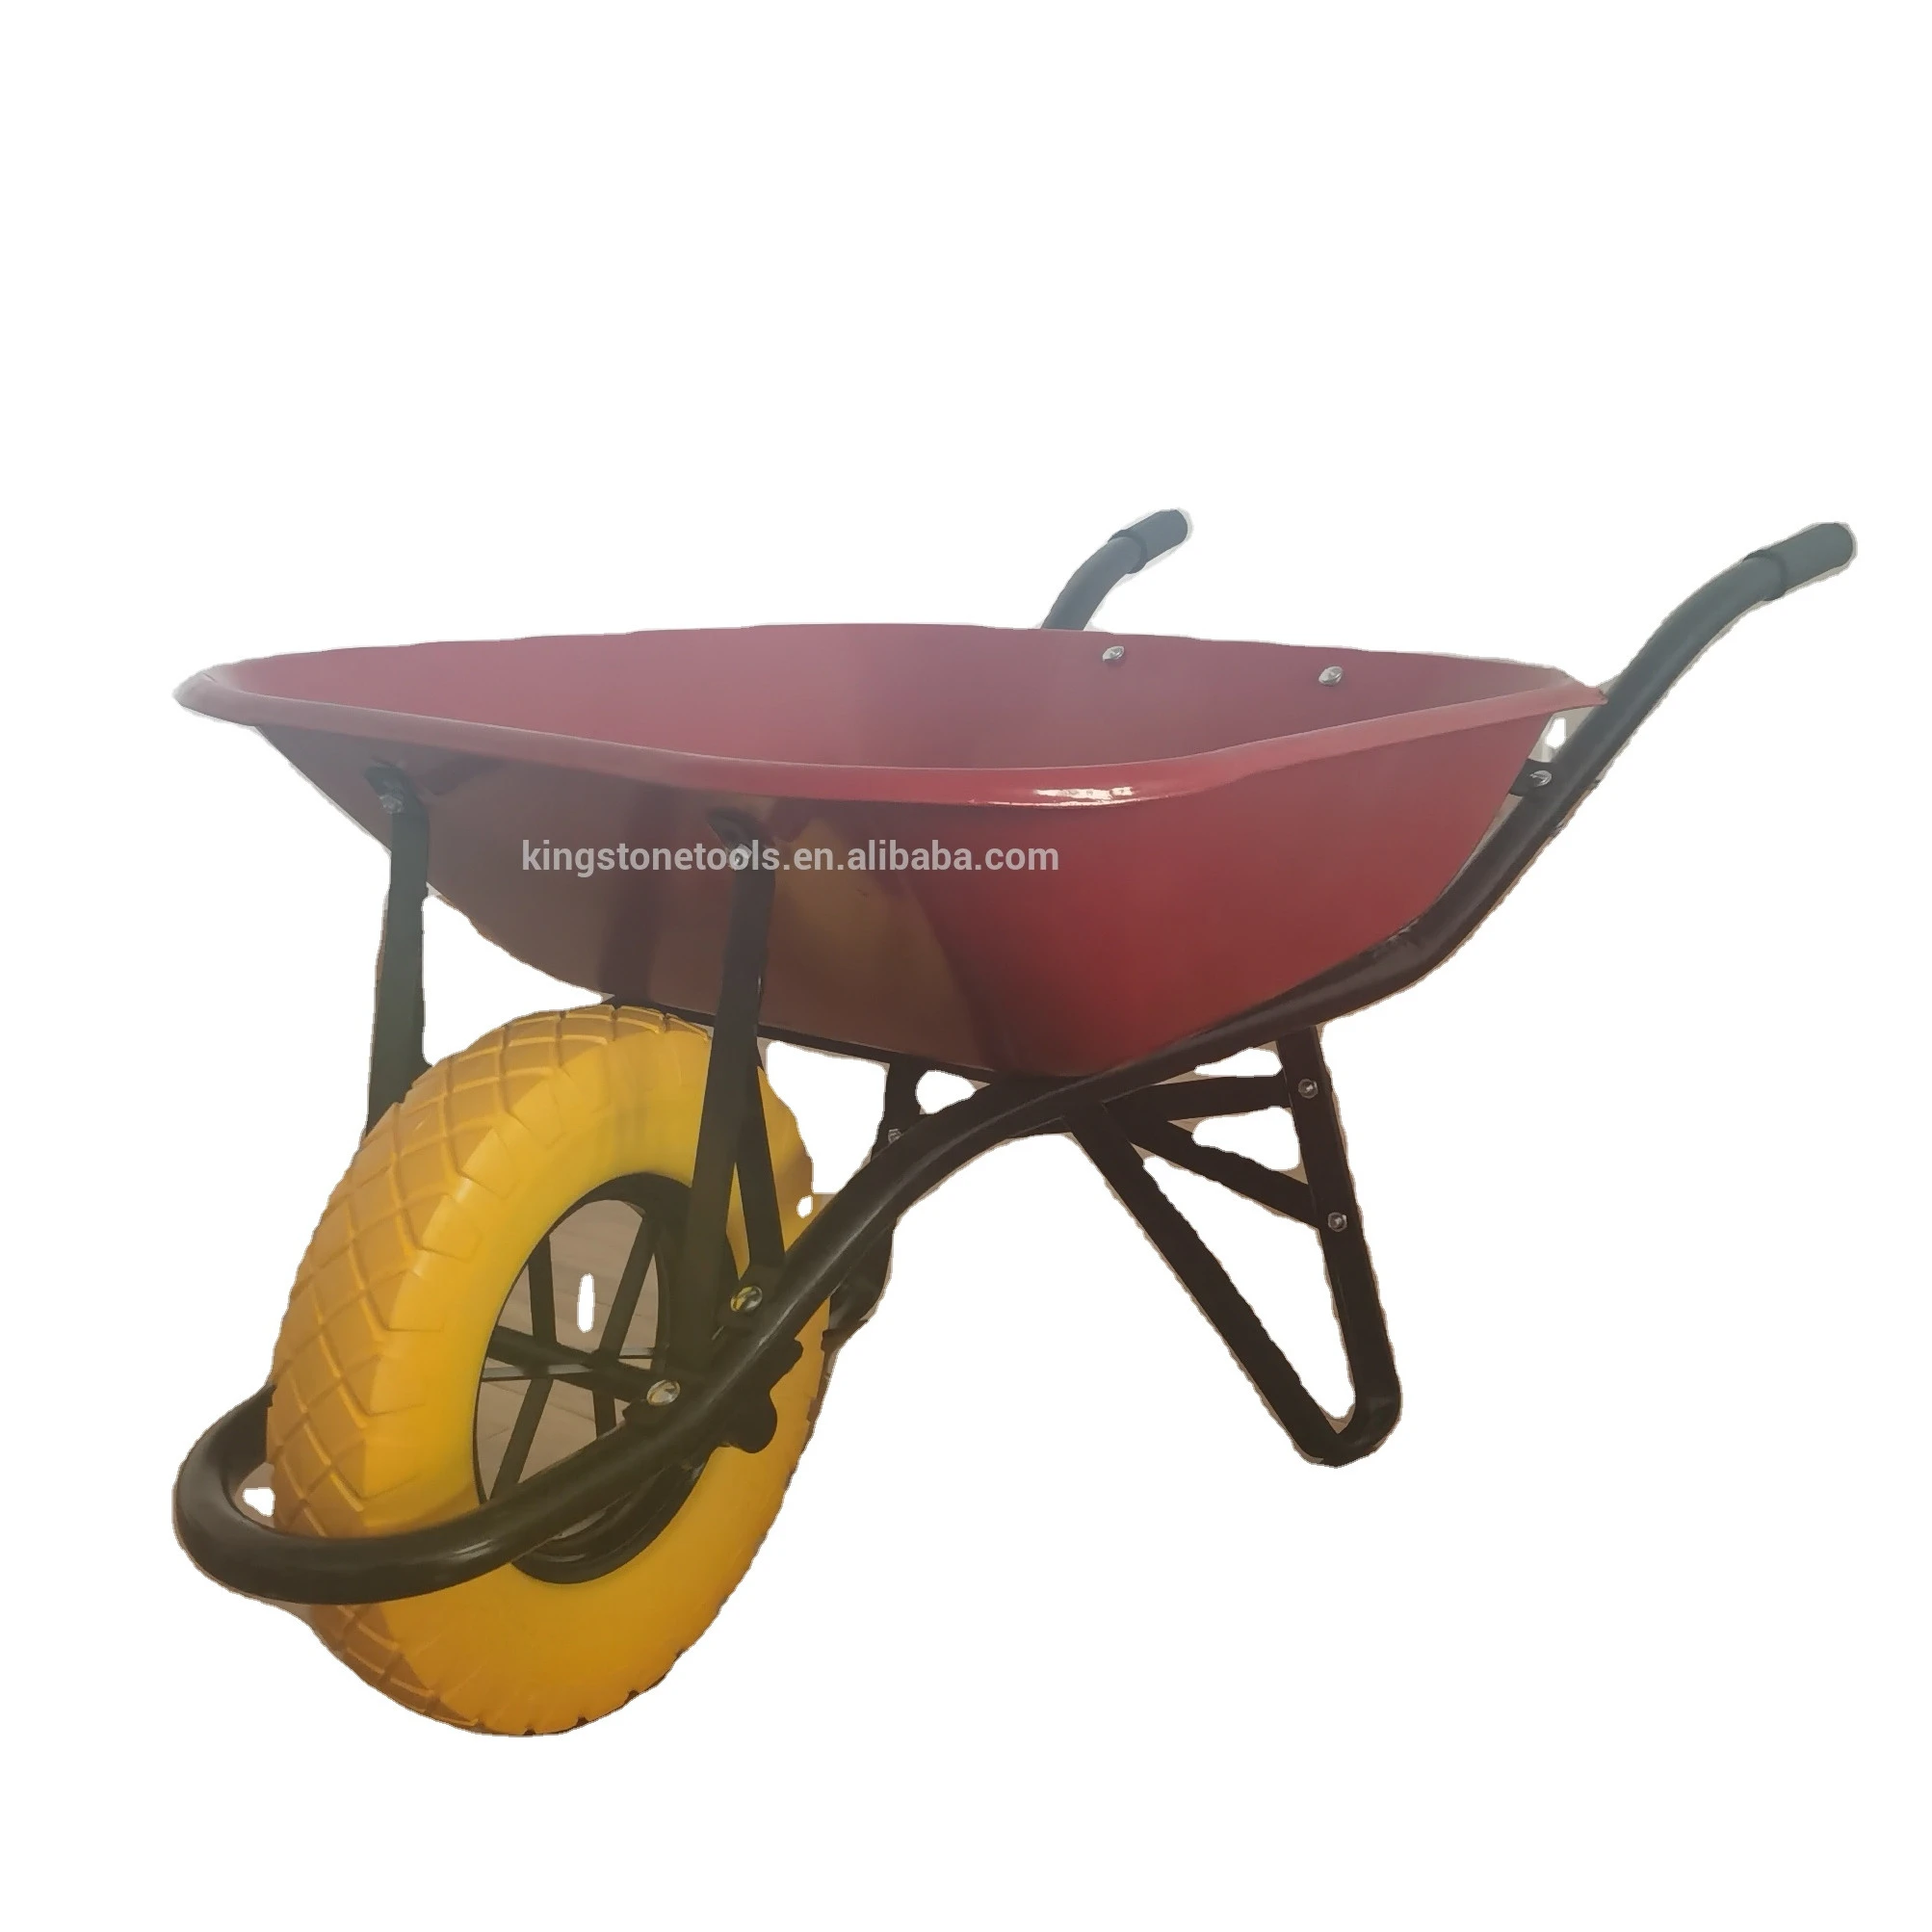 Construction France model Wheelbarrow WB6400 for Angola market and African market